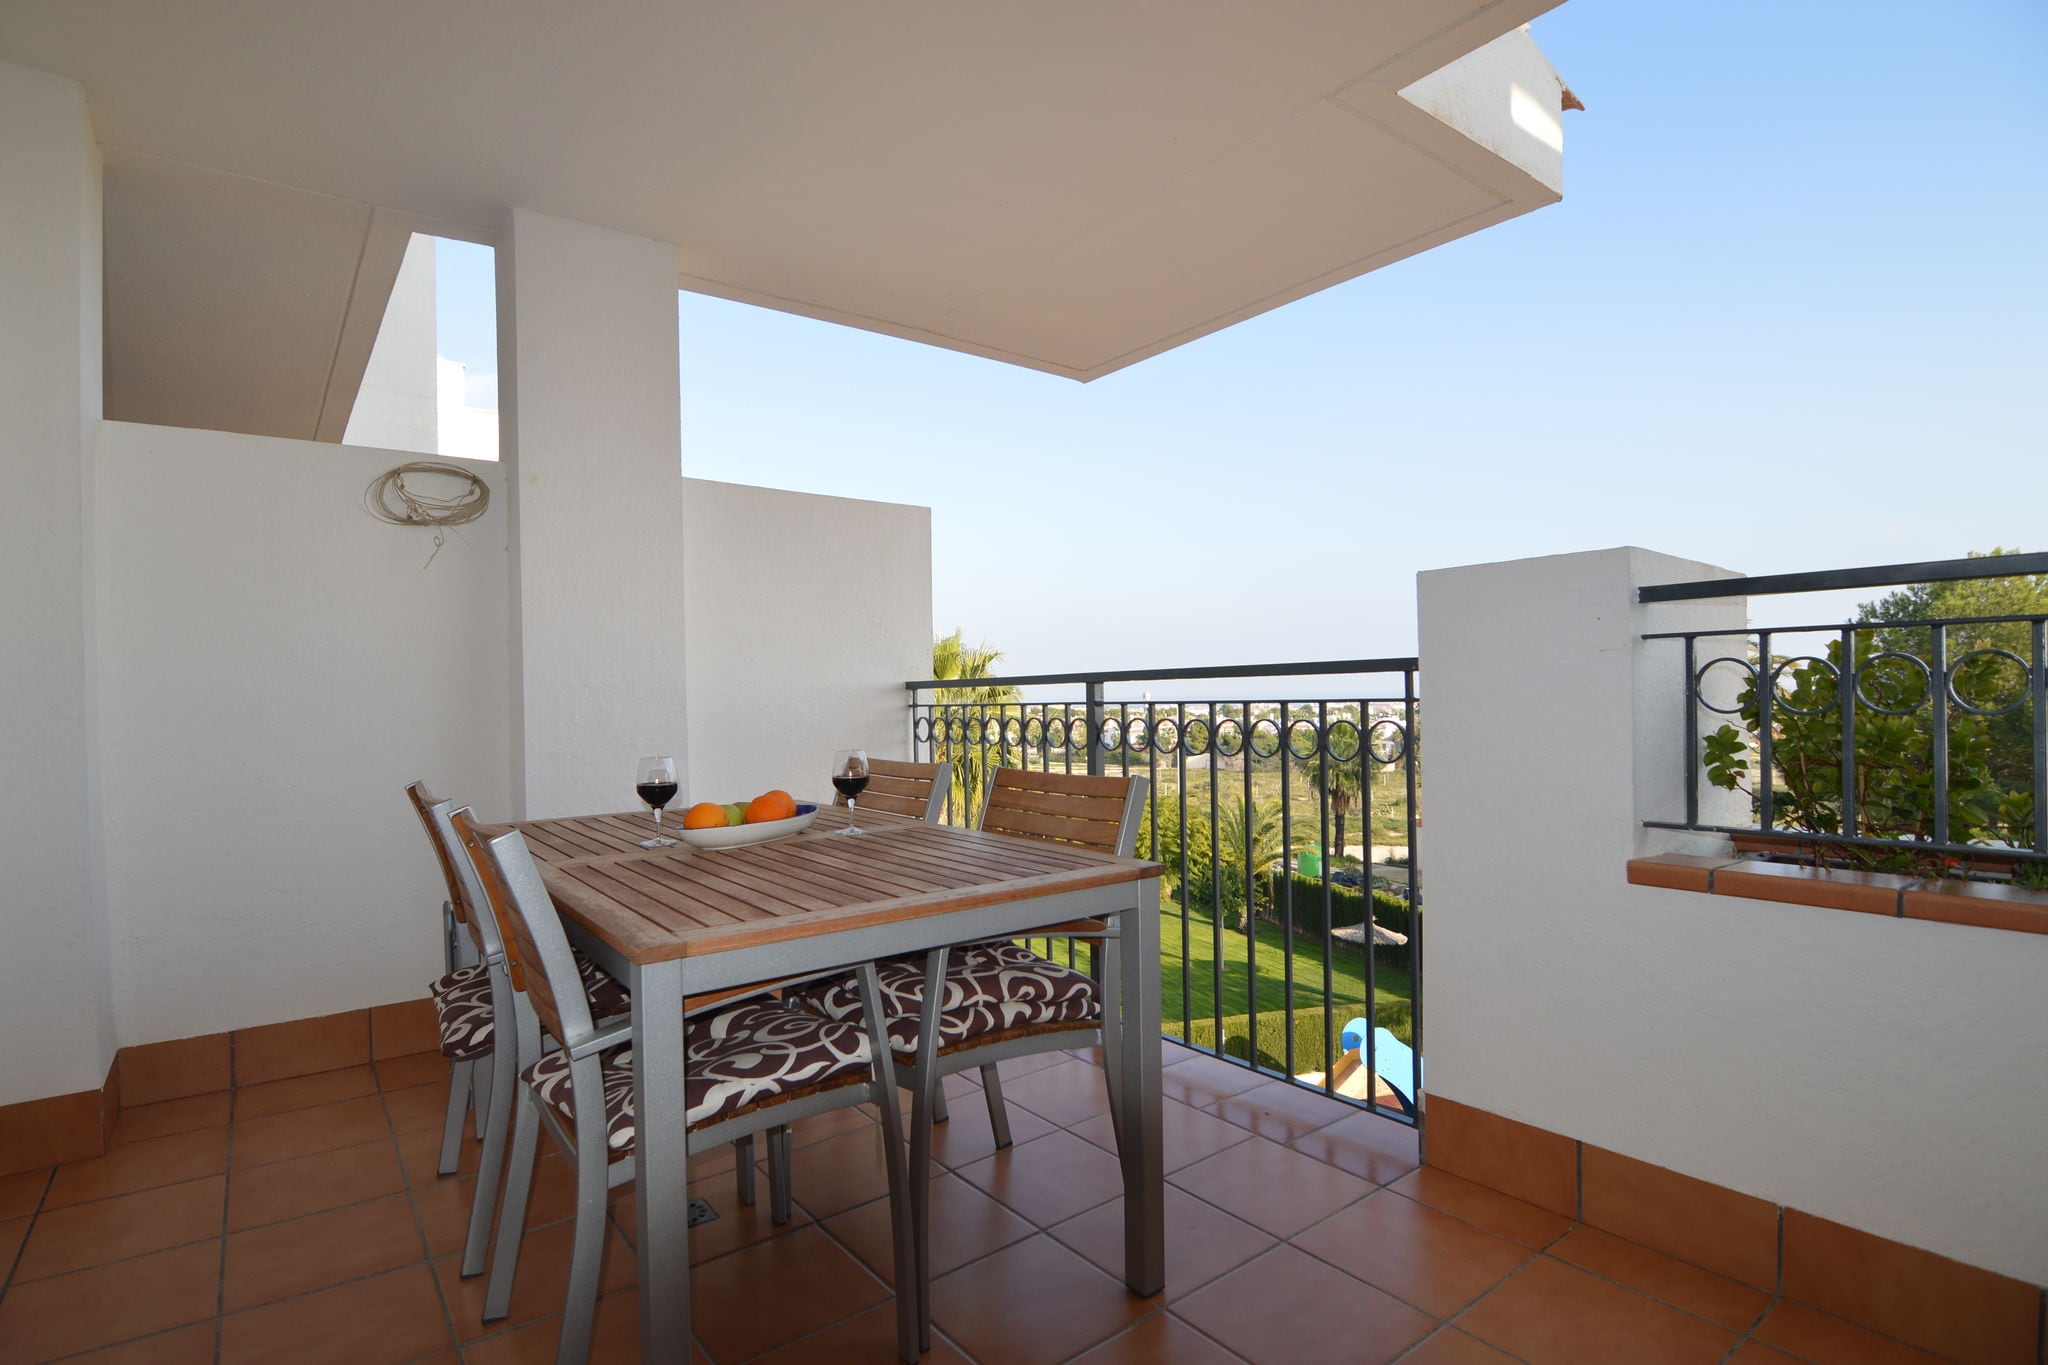 Modernes Appartement mit Swimmingpool am Meer in Valencia